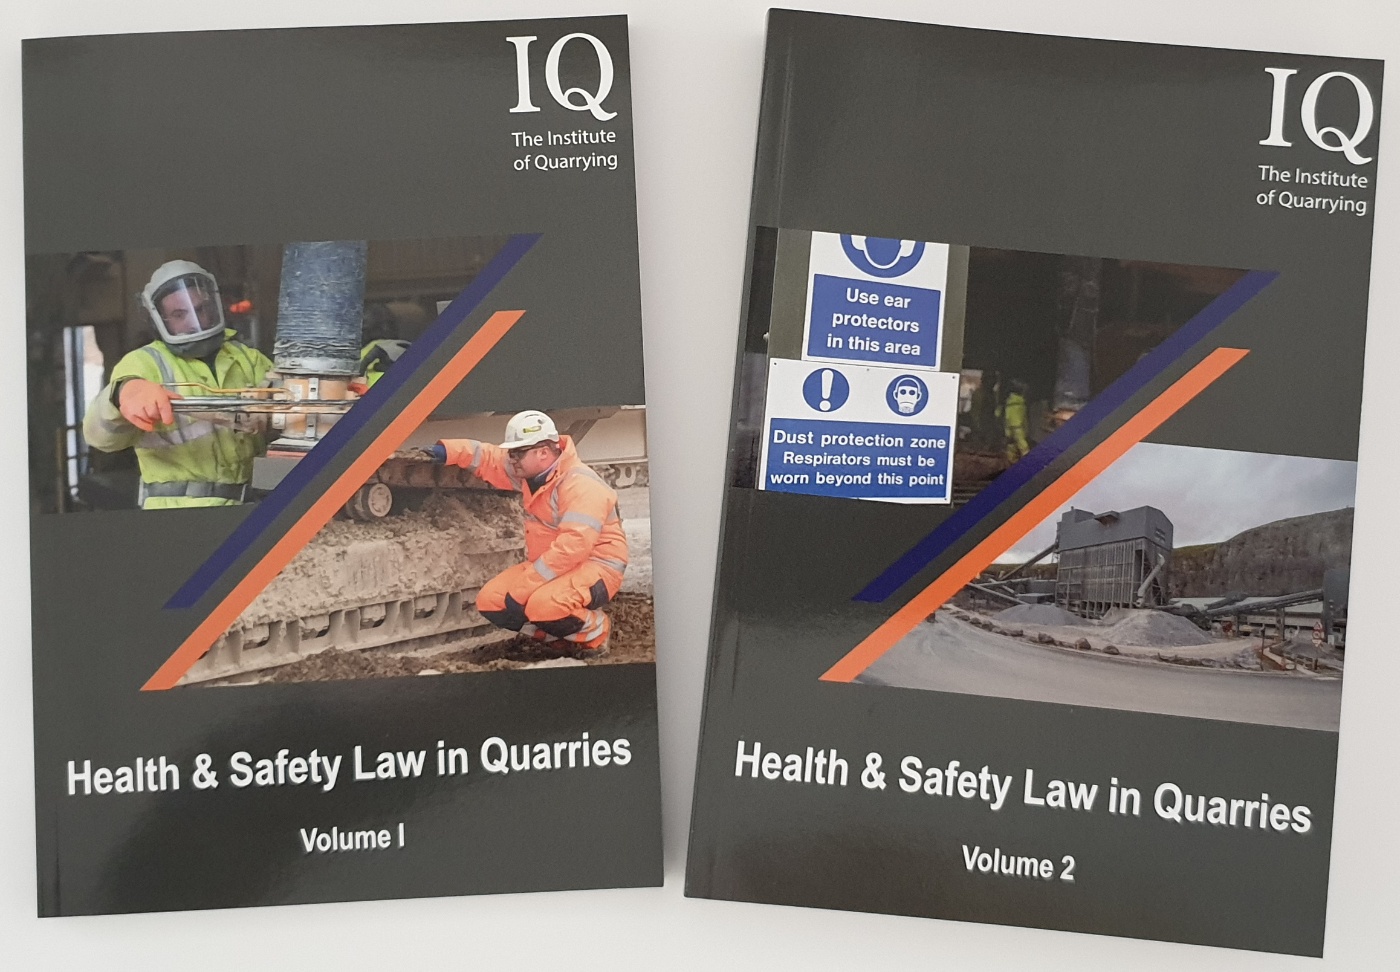 H&S Law in Quarries Vol 1 and 2